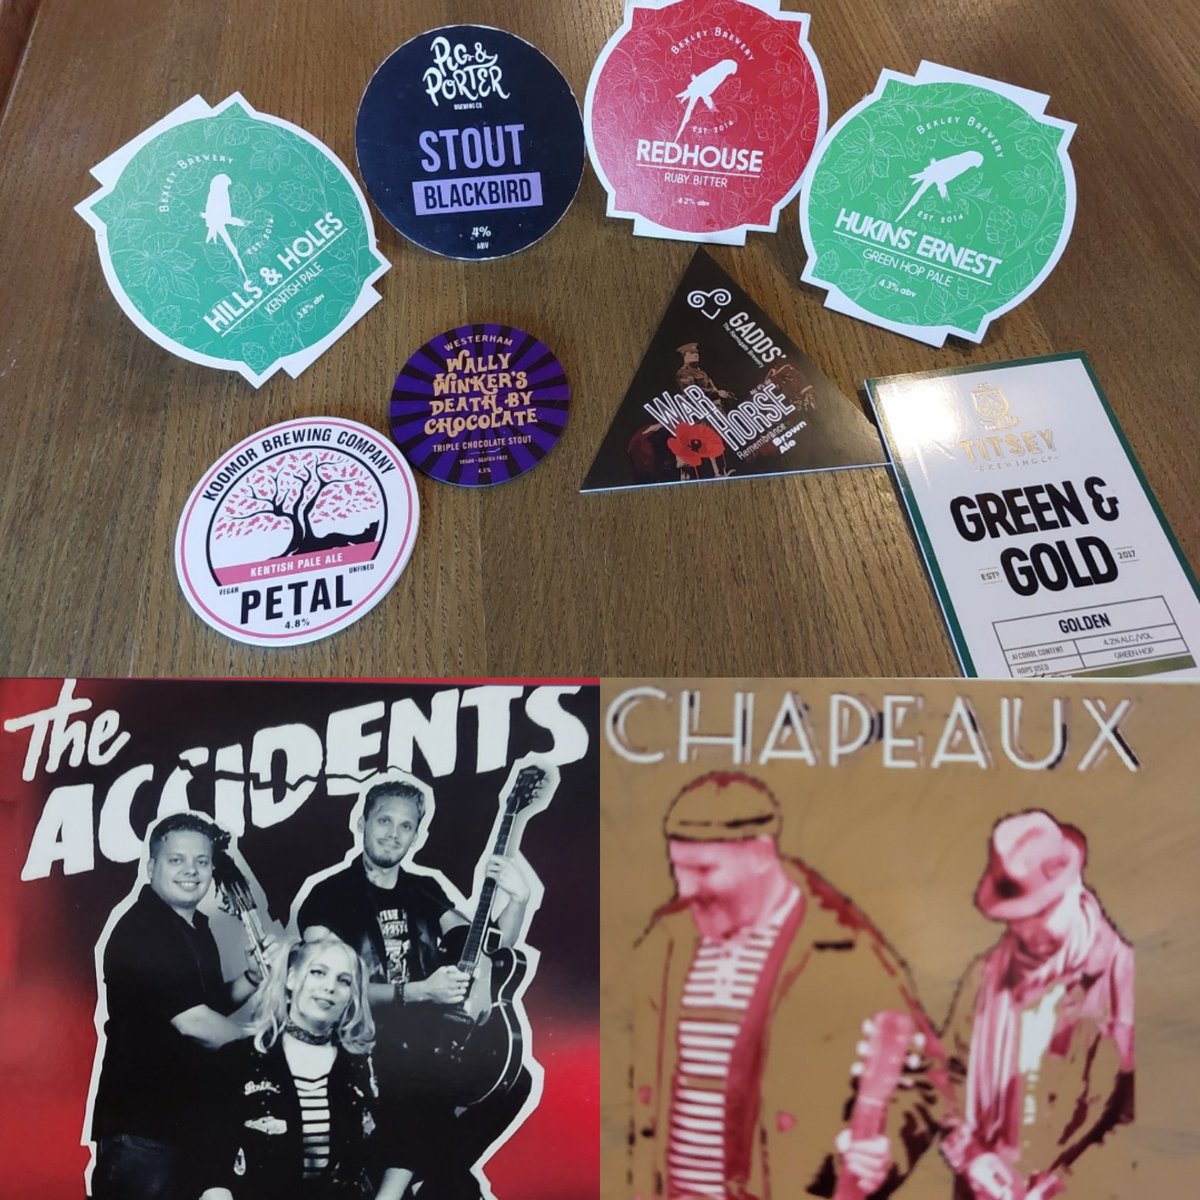 The Accidents are on Sat 11th 5pm-7pm, Chapeaux on Sun 12th 3pm-5pm. We have these beauties on for your tasting pleasure. #themagnetbroadstairs #Broadstairs #theaccidents #chapeaux #bexleybrewery #pigandporter #gaddsbrewery #westerhambrewery #koomorbrewingco #titseybrewingco